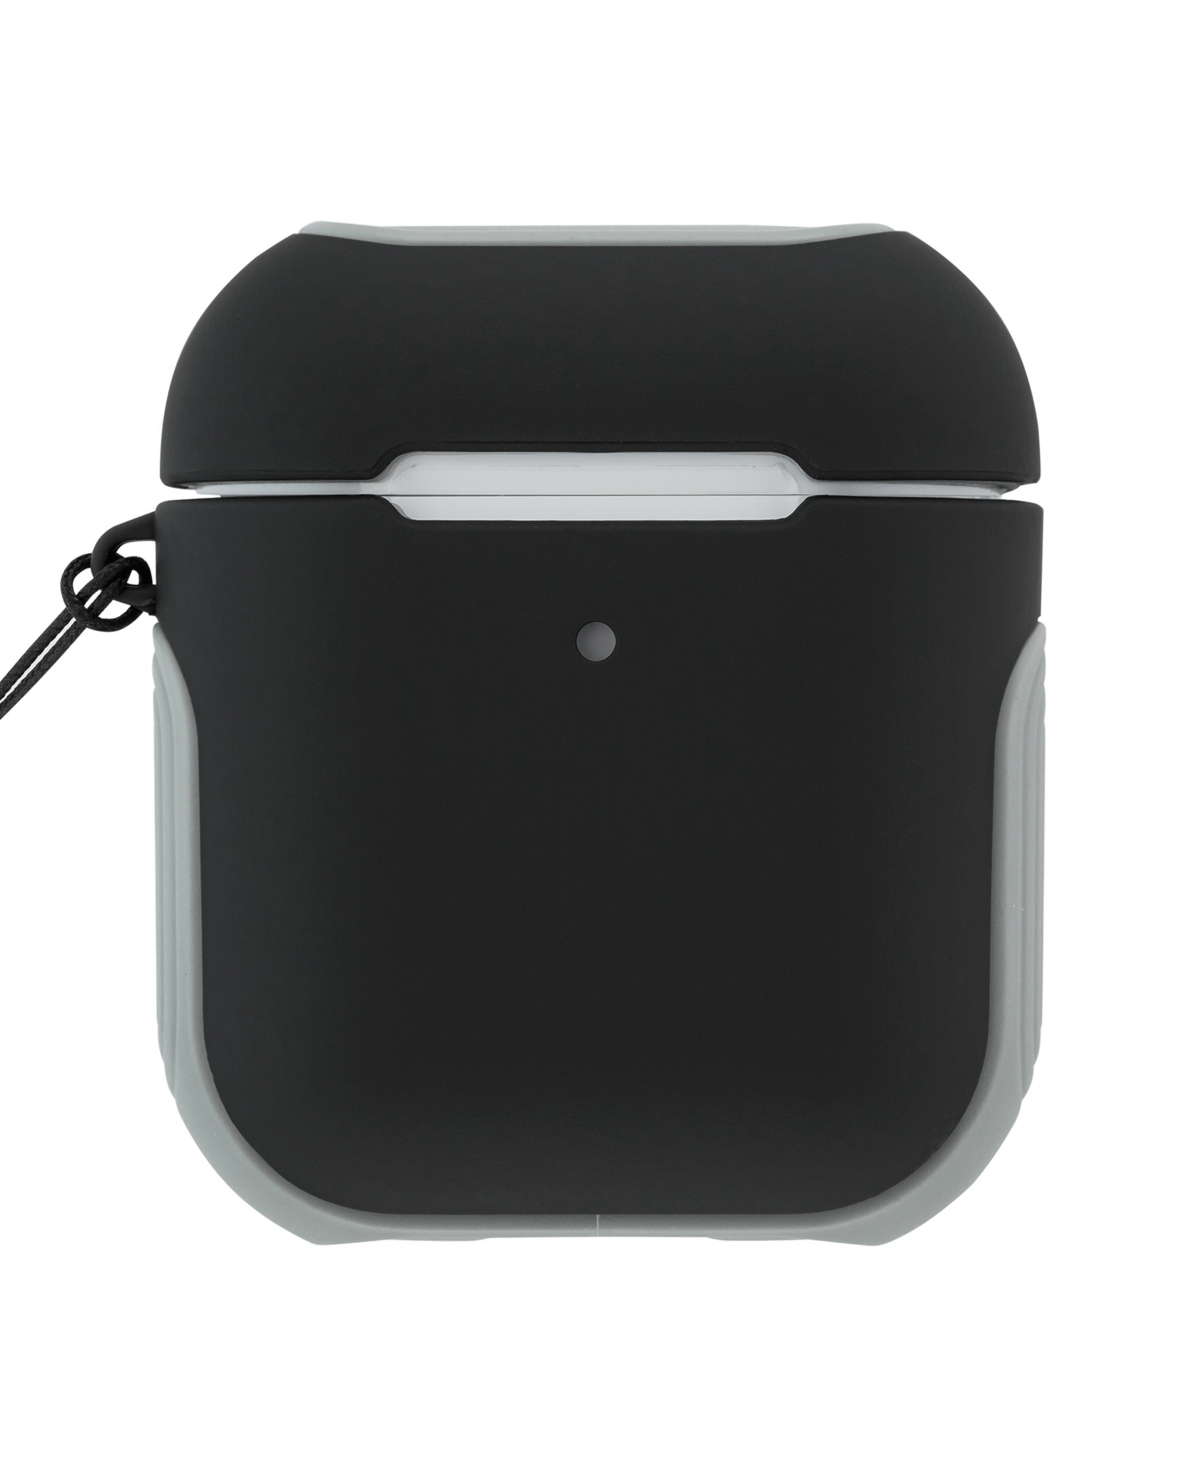 in Black with Gray Accents Apple AirPod Sport Case - Black, Gray